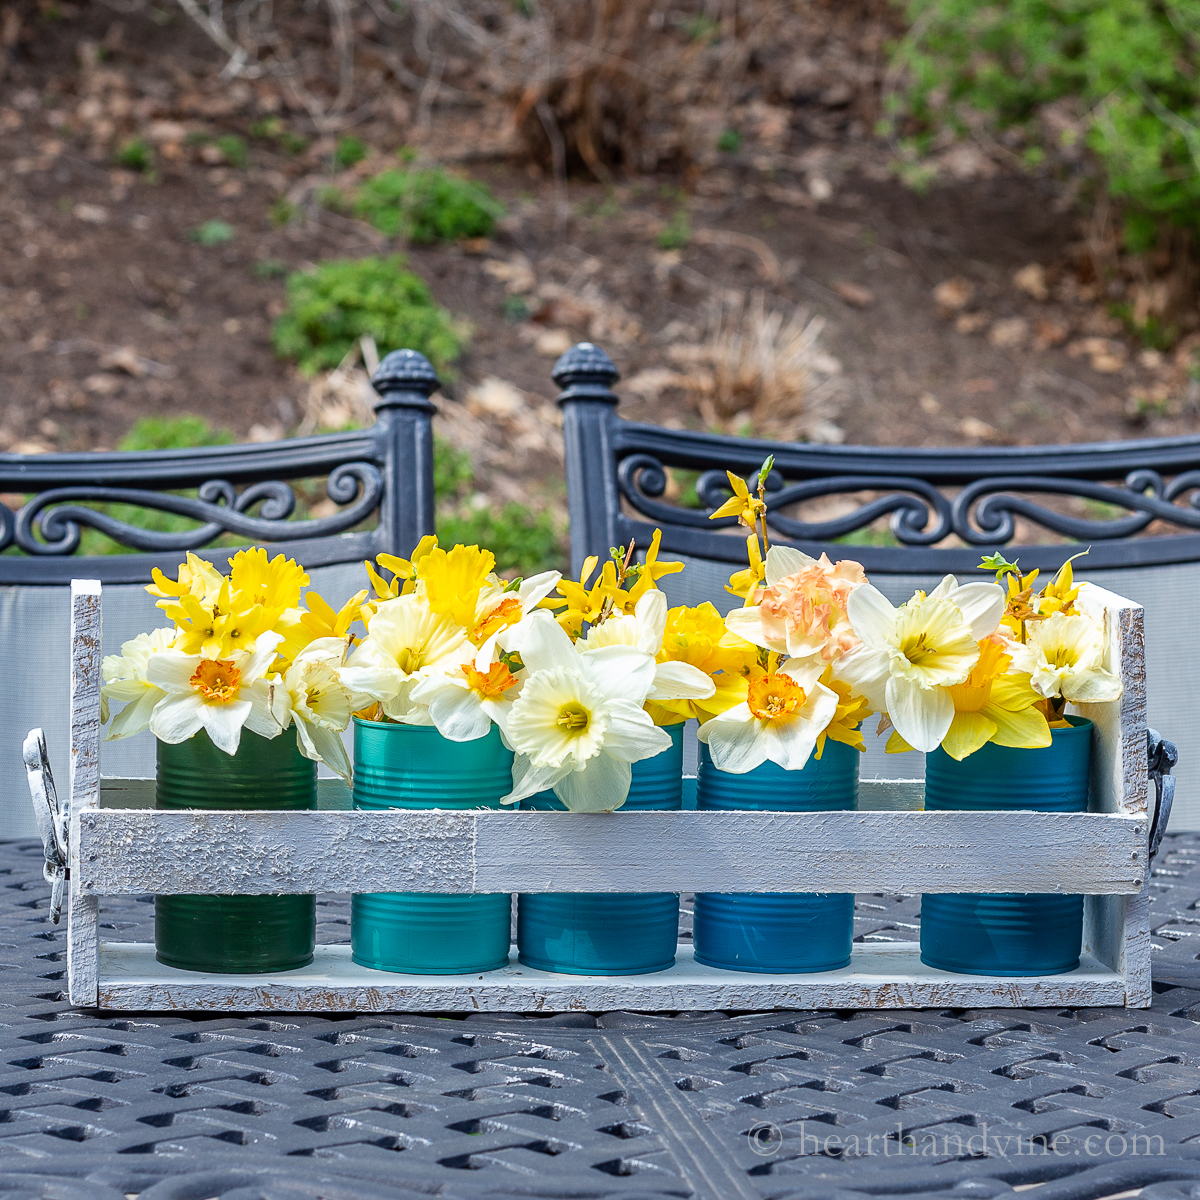 Daffodils in five colored tin cans in a pallet wood caddy